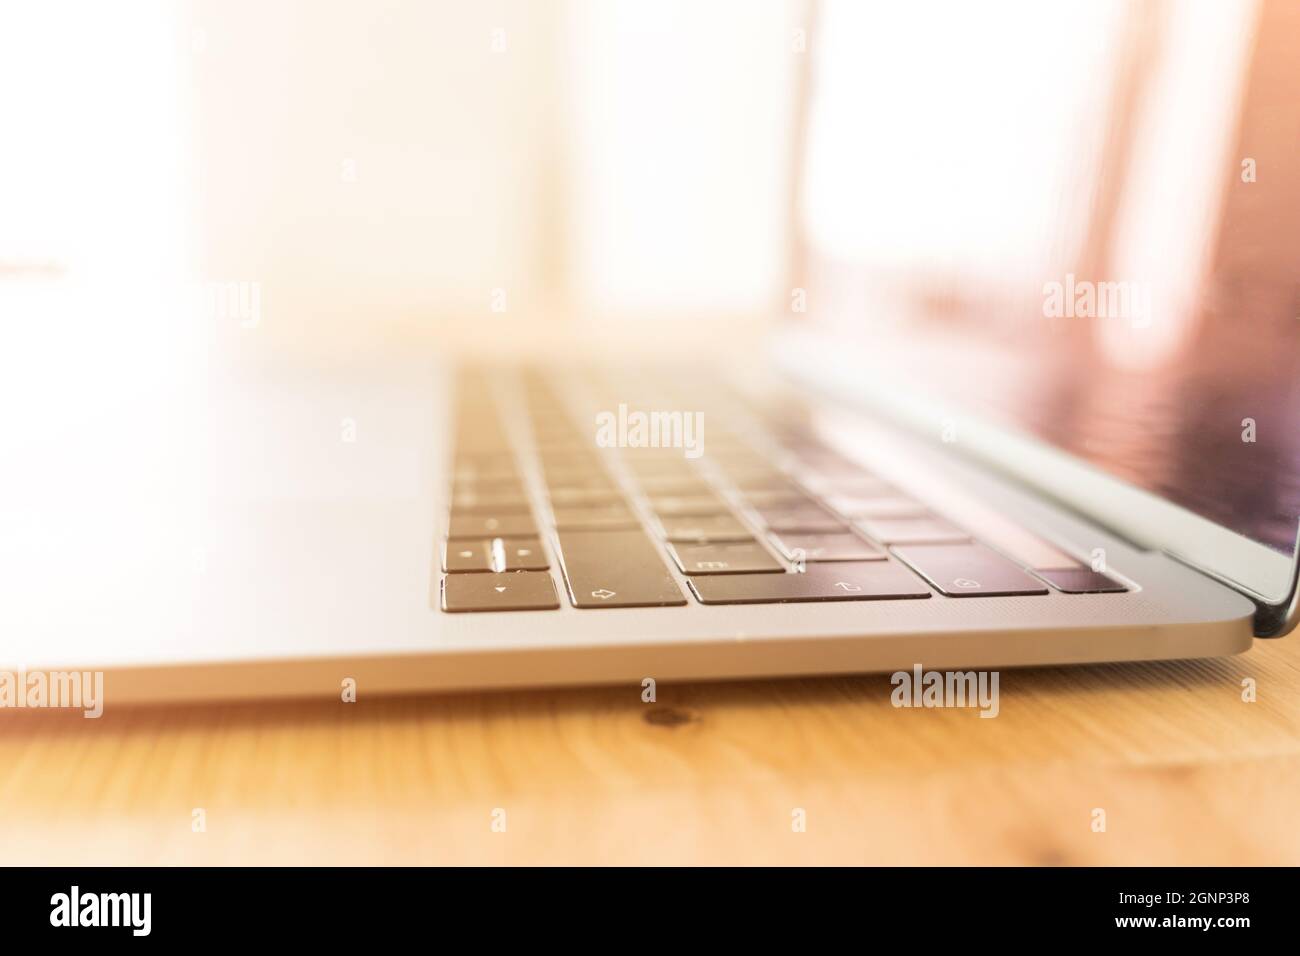 Modern laptop on a wooden table. Computer keyboard closeup Stock Photo